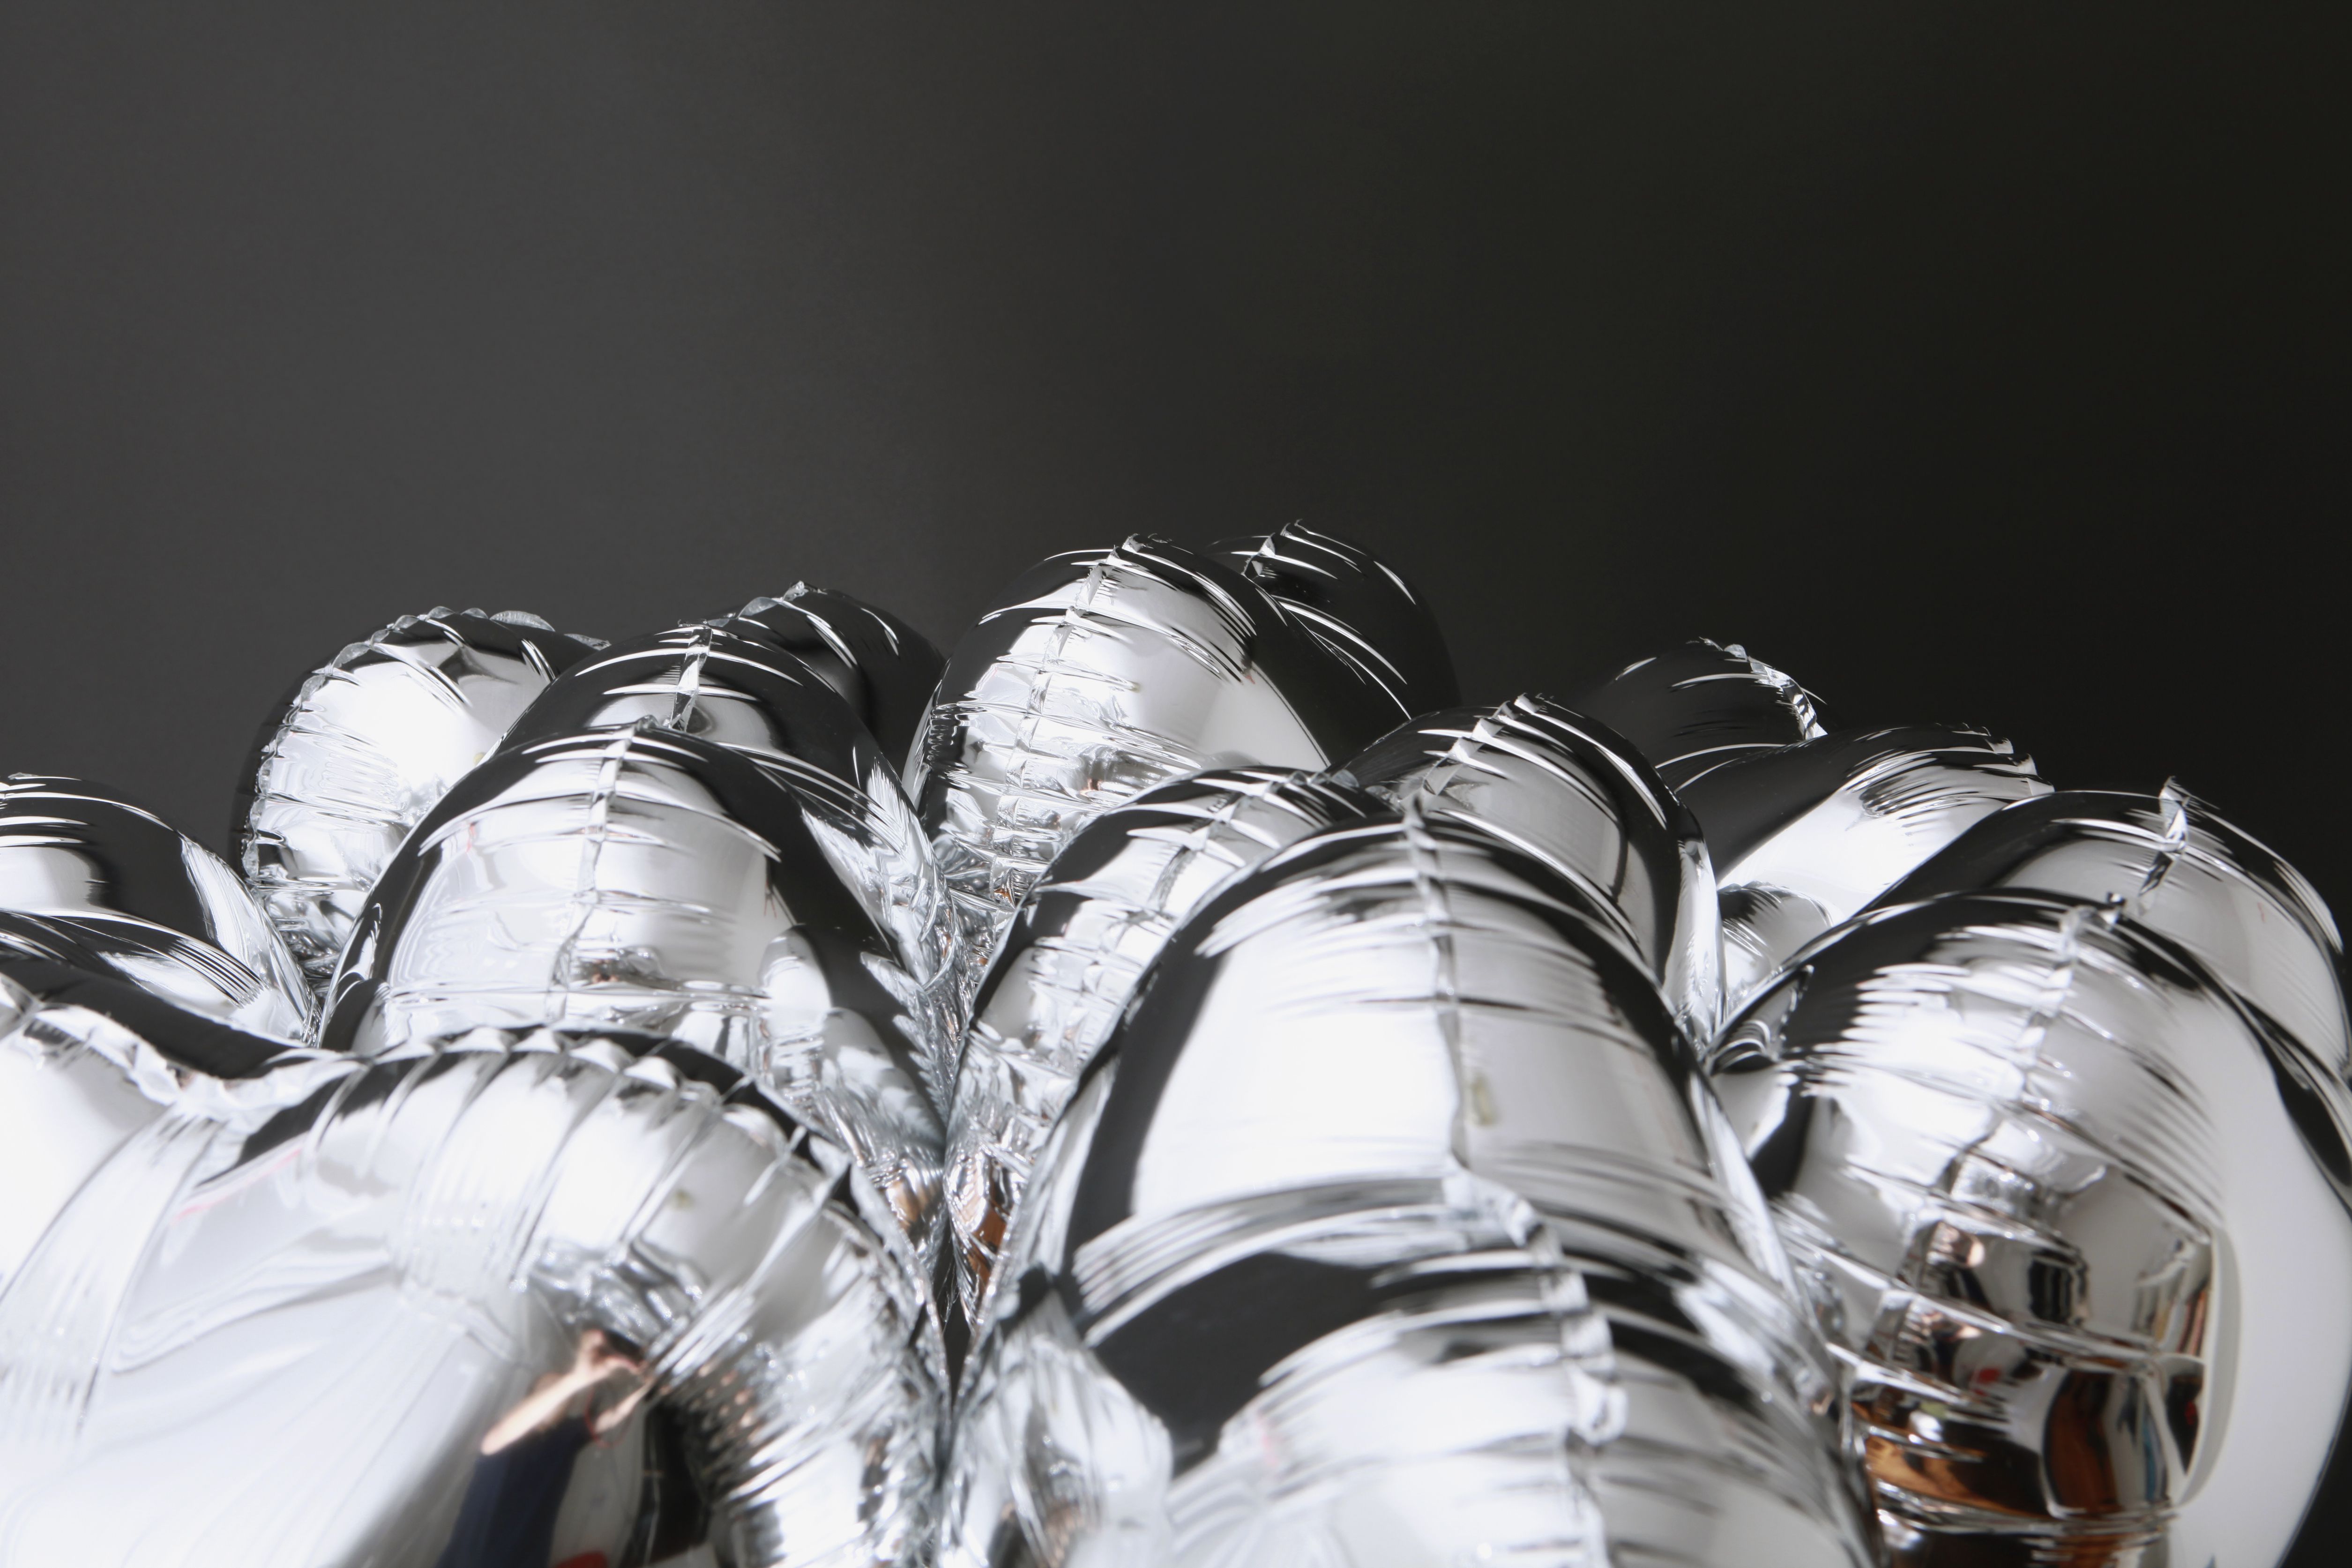 What Is Mylar? Definition, Properties, How It's Made